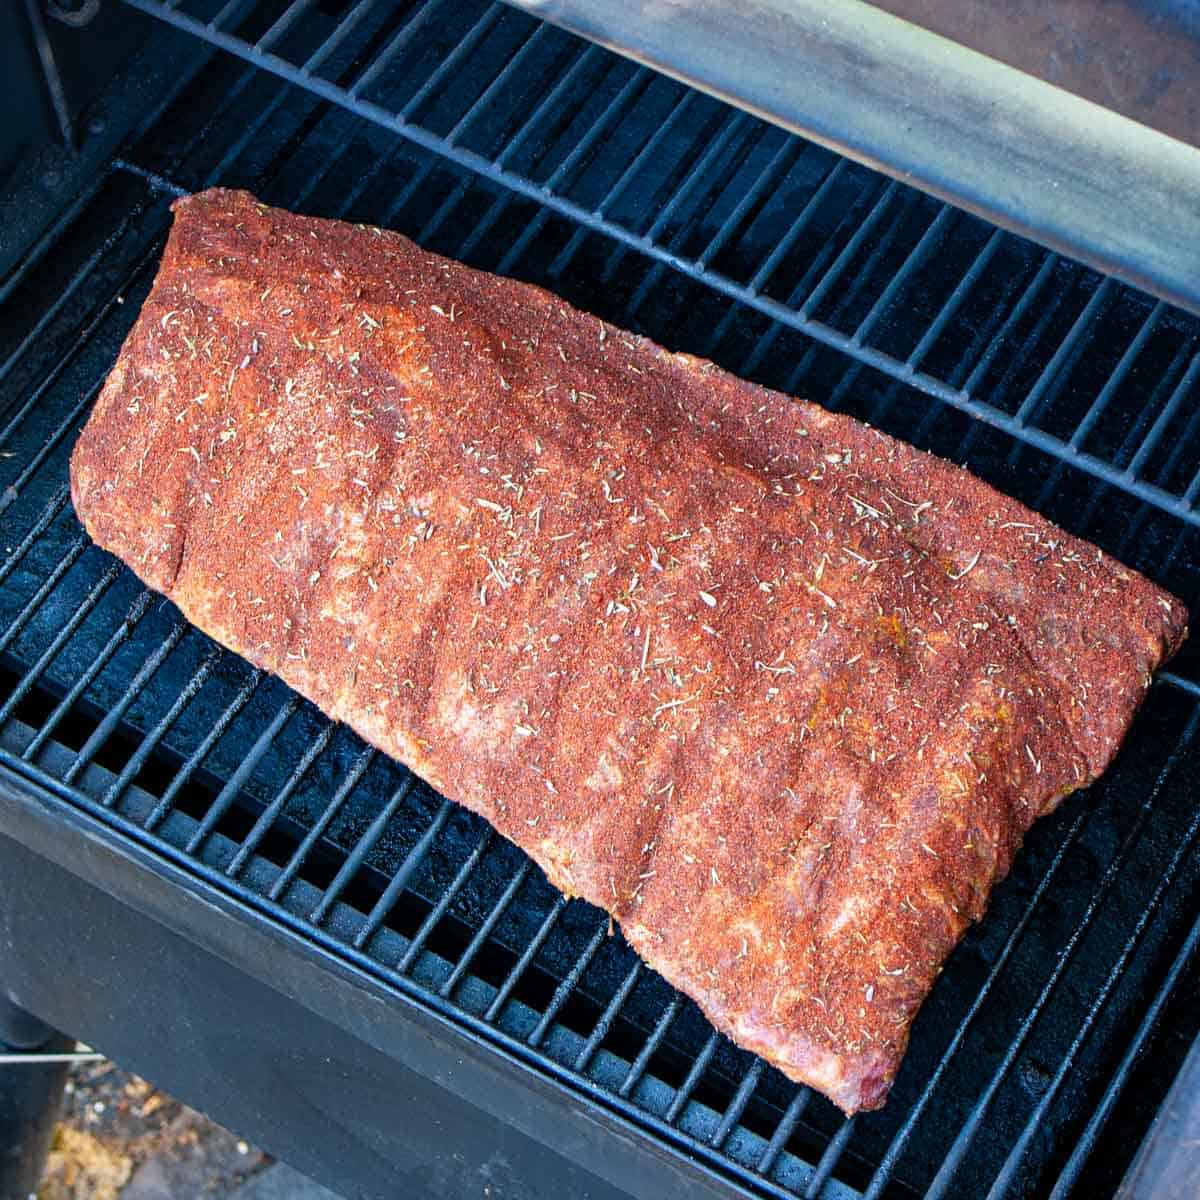 Rack of ribs freshly placed on smoker grill with caption.